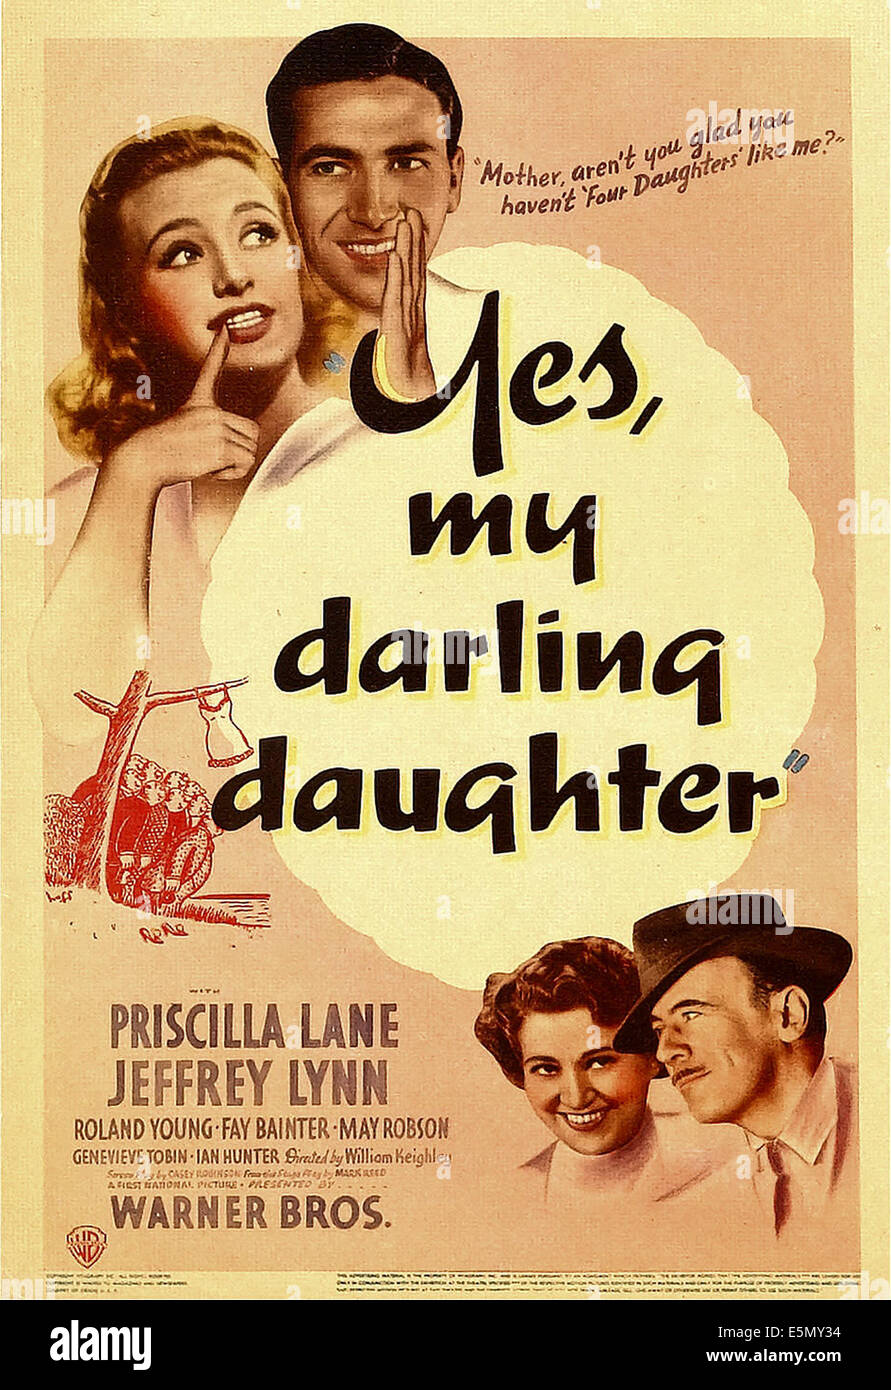 YES, MY DARLING DAUGHTER, top from left: Priscilla Lane, Jeffrey Lynn, bottom from left: Fay Bainter, Roland Young on midget Stock Photo